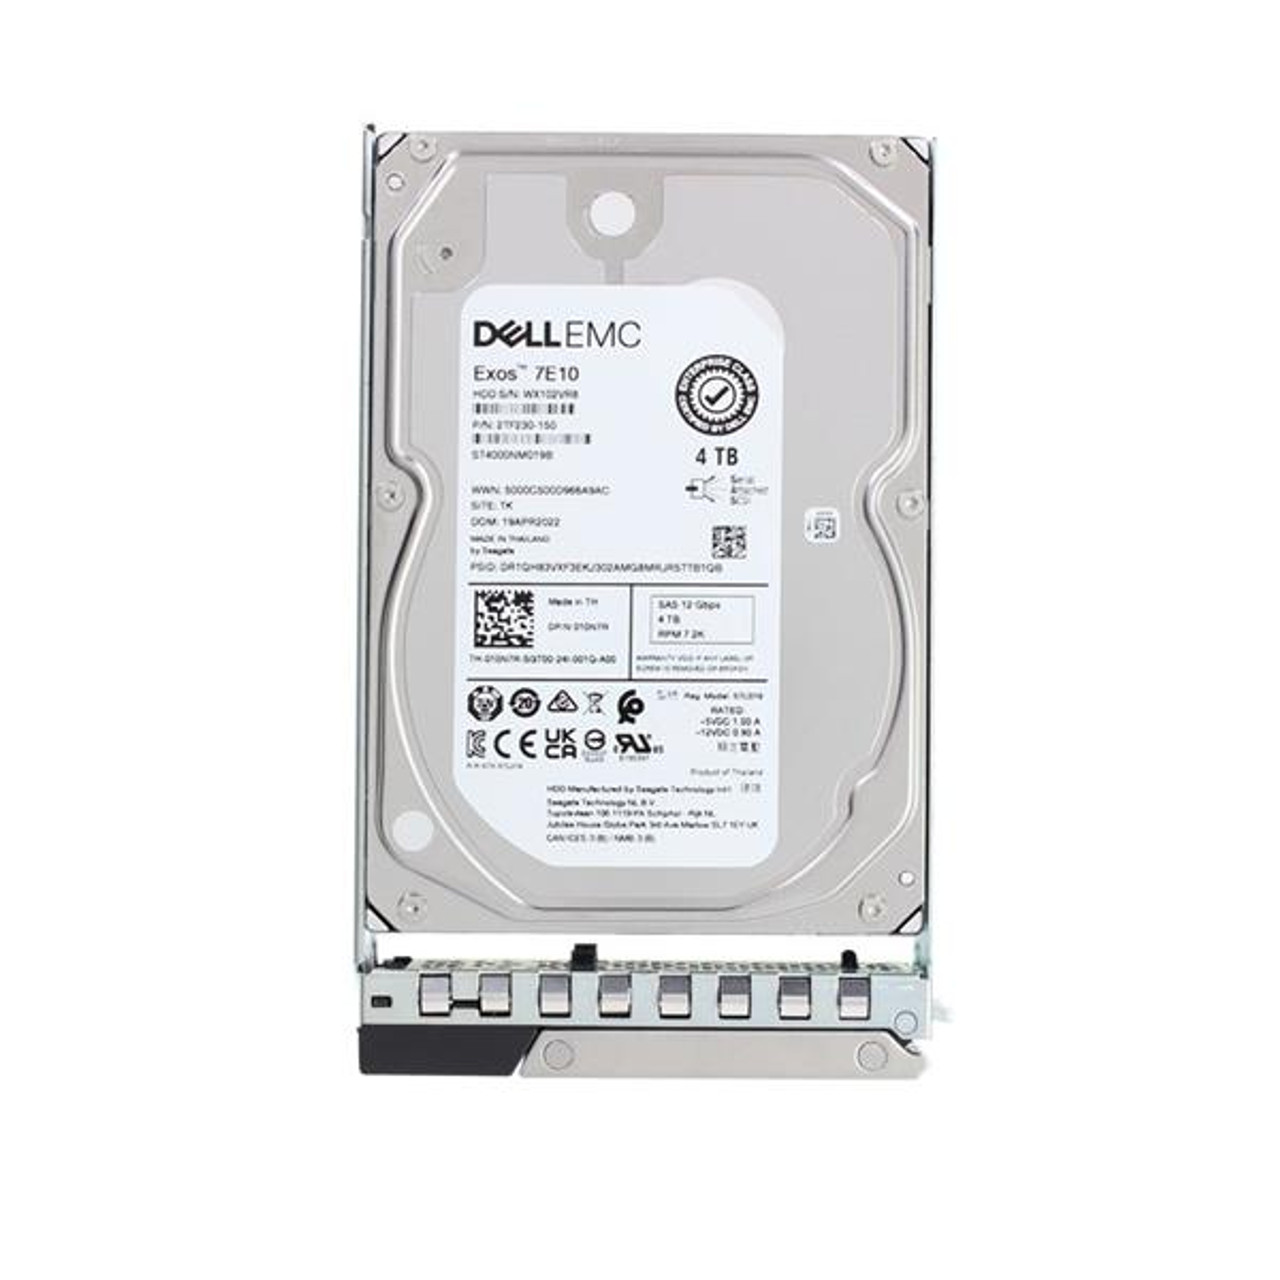 Dell 4TB 7200RPM SAS 12Gbps (512n) Hot Plug 3.5-inch Hard Drive with Tray